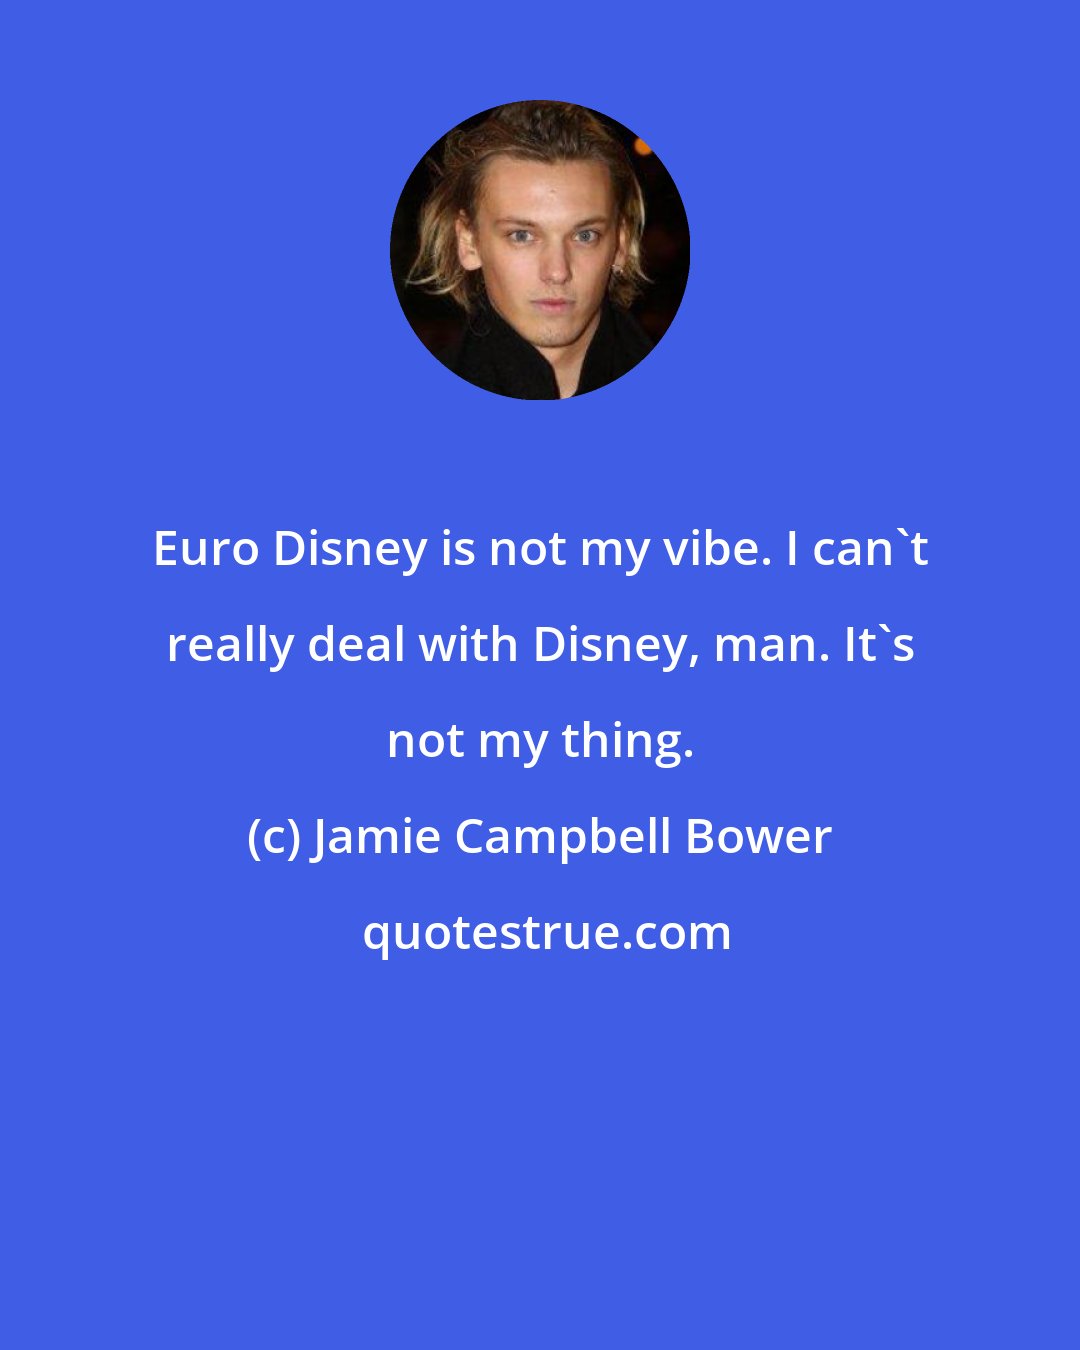 Jamie Campbell Bower: Euro Disney is not my vibe. I can't really deal with Disney, man. It's not my thing.